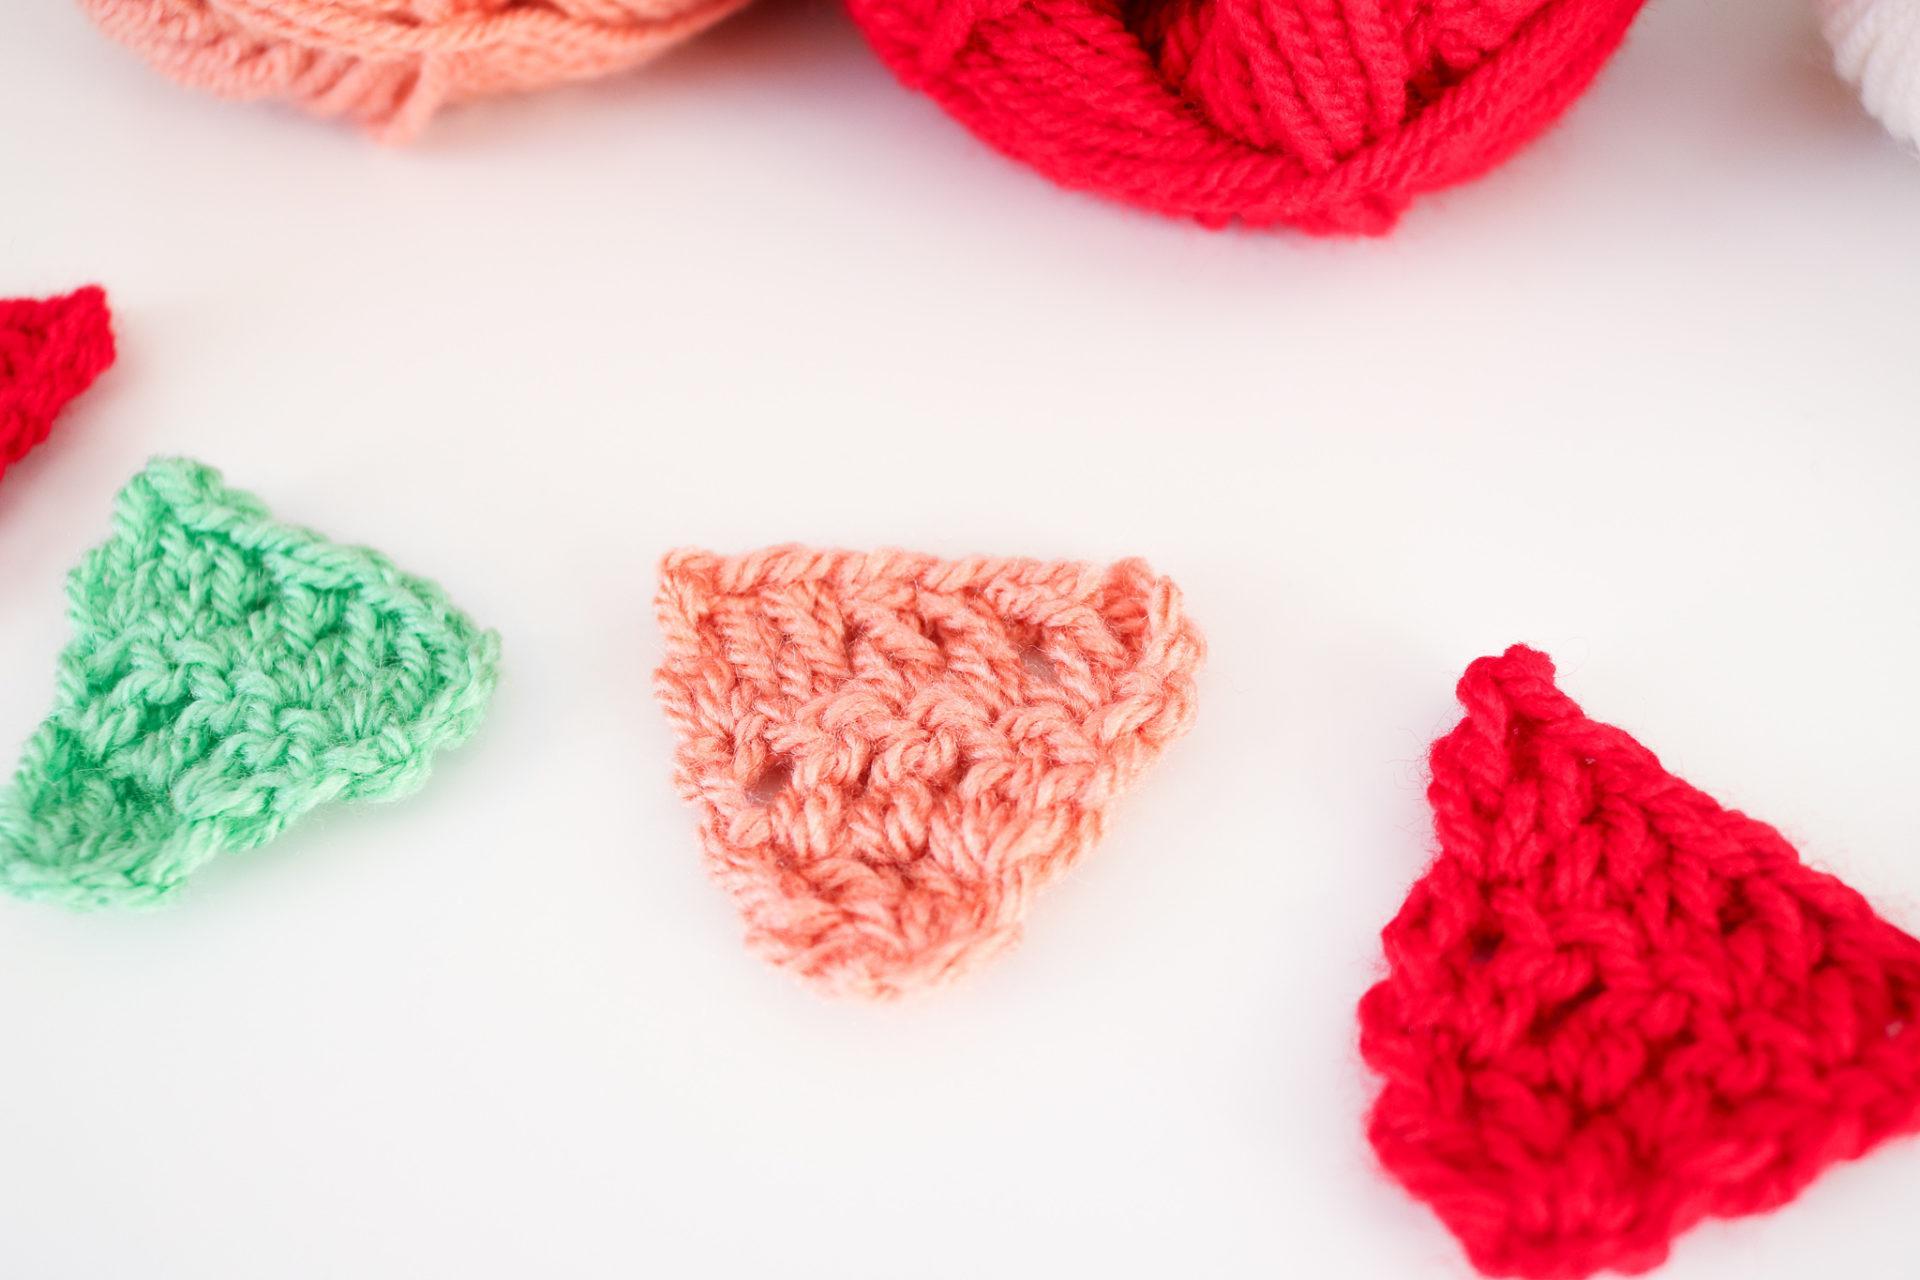 flay lay image of three mini crochet triangles made in green, coral and red yarn. 